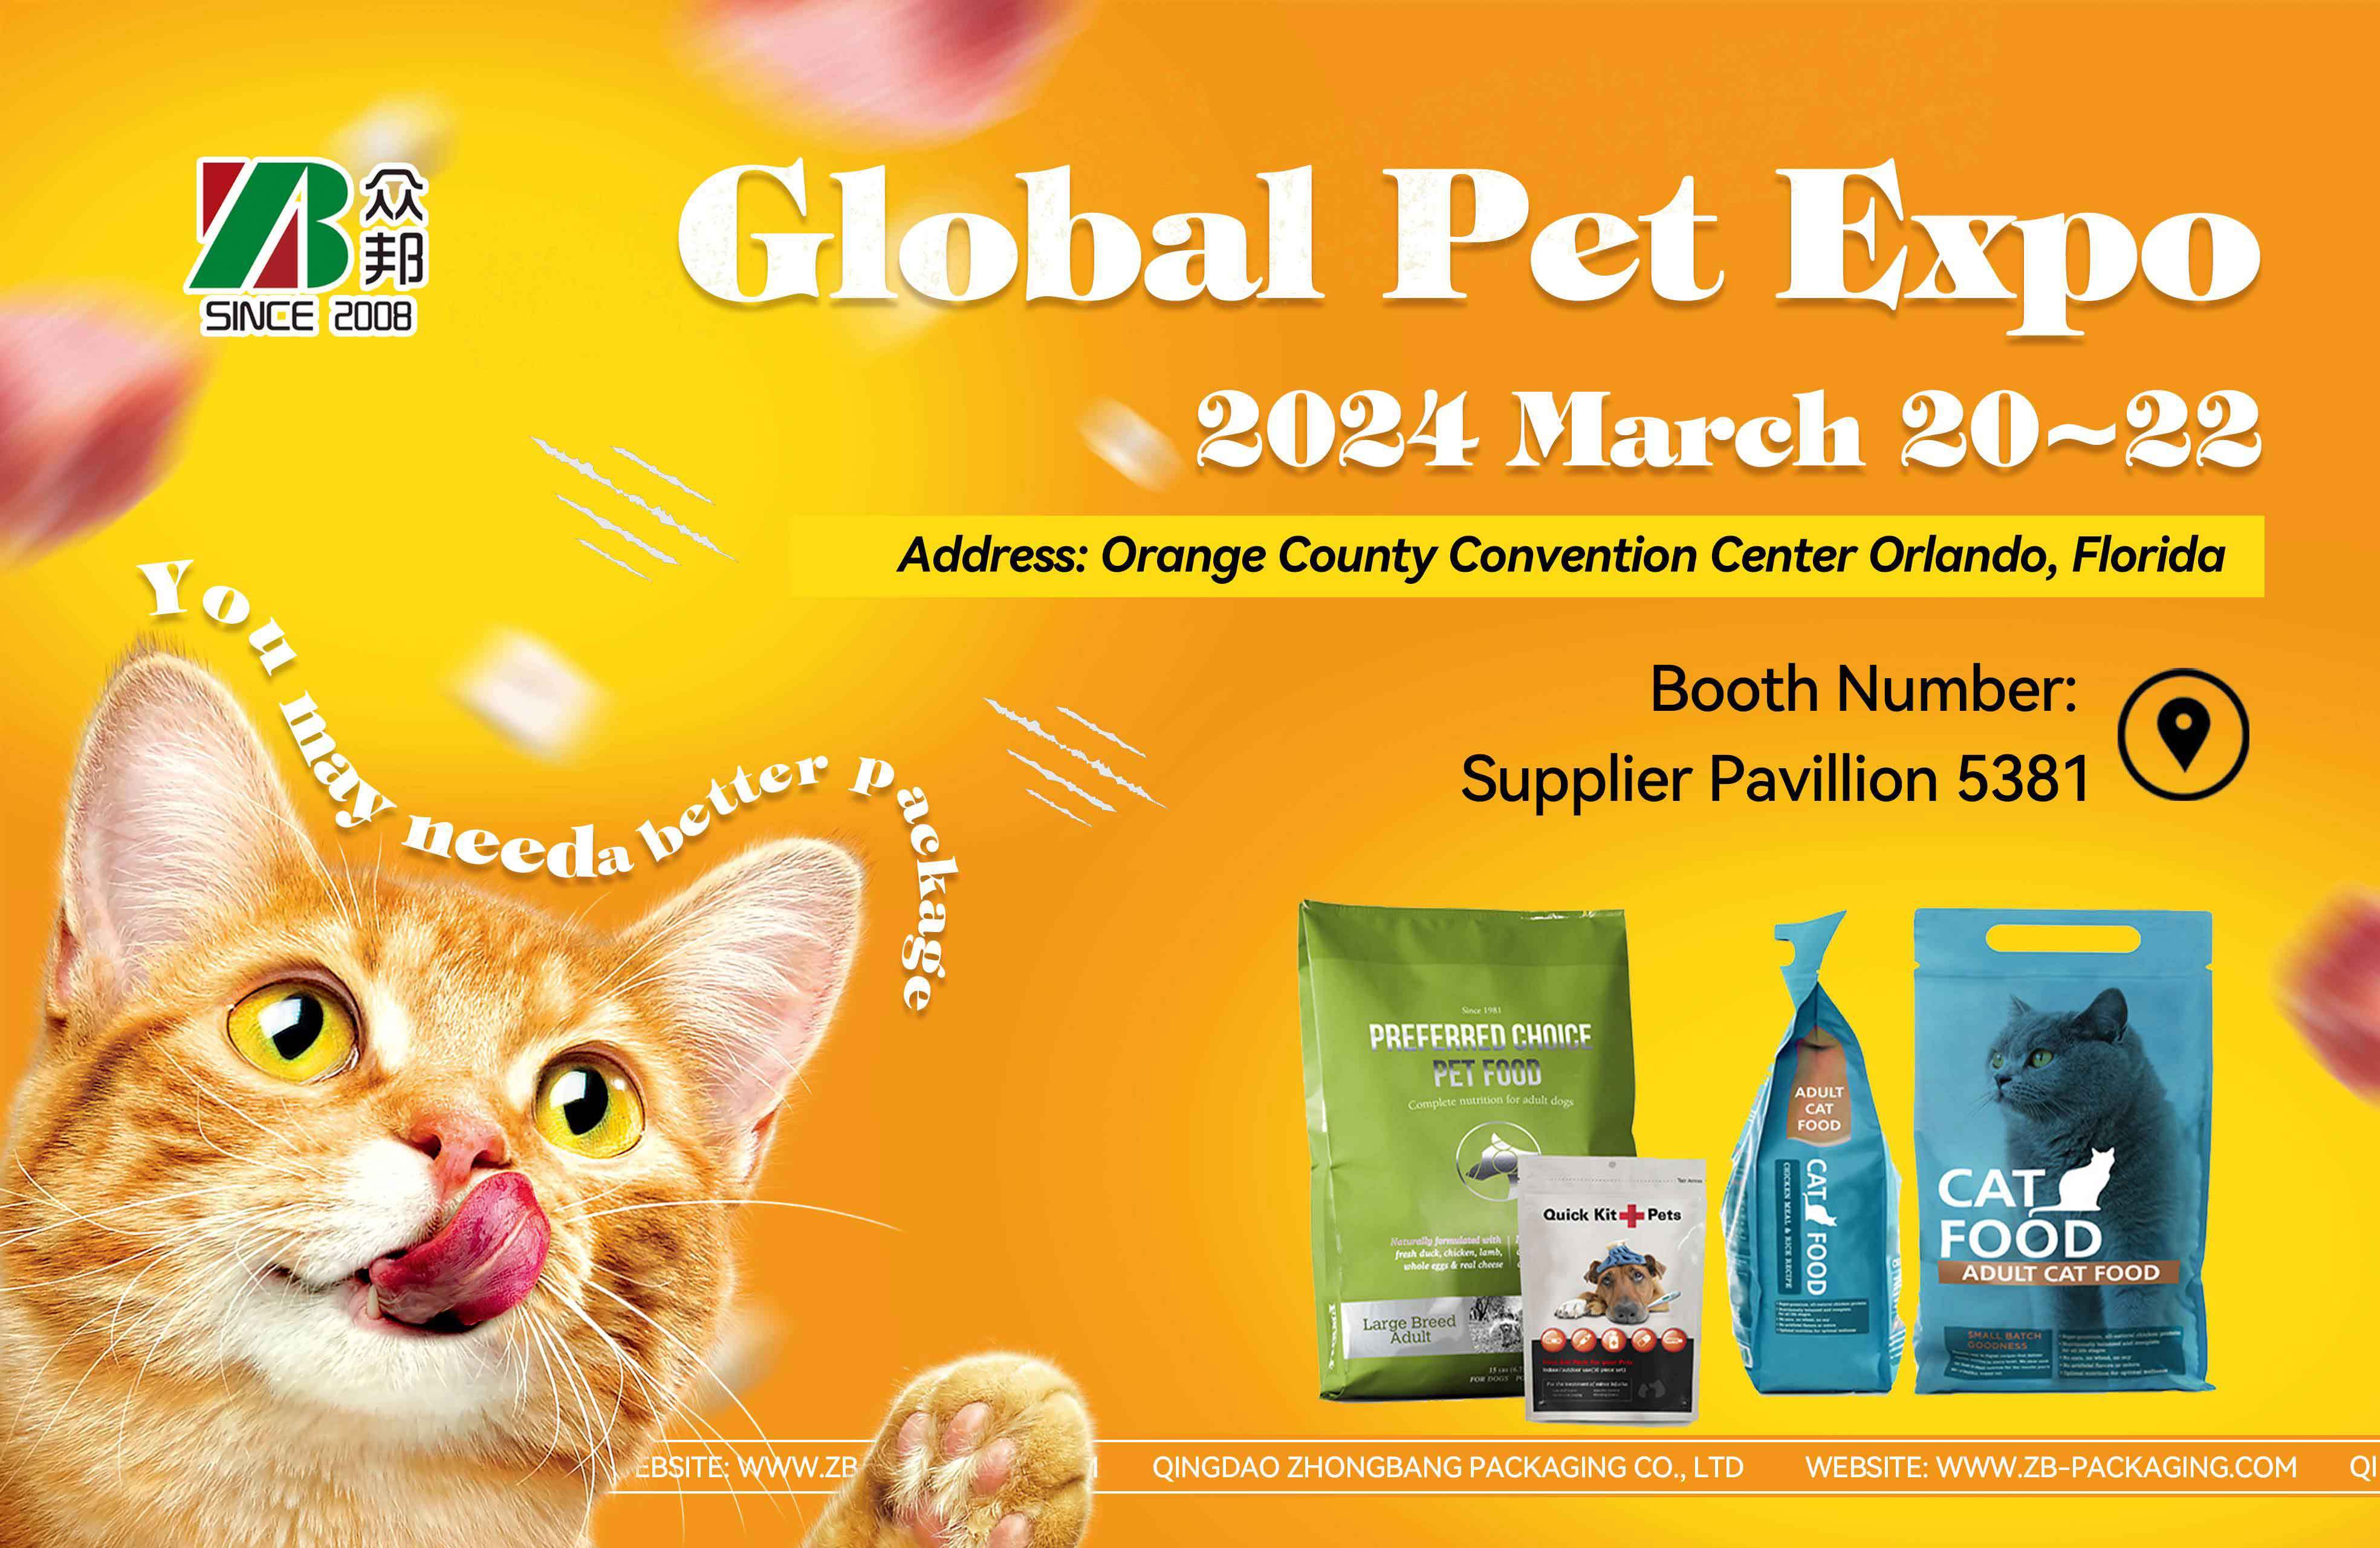 Meeting you at Glaobal Pet EXPO 2024